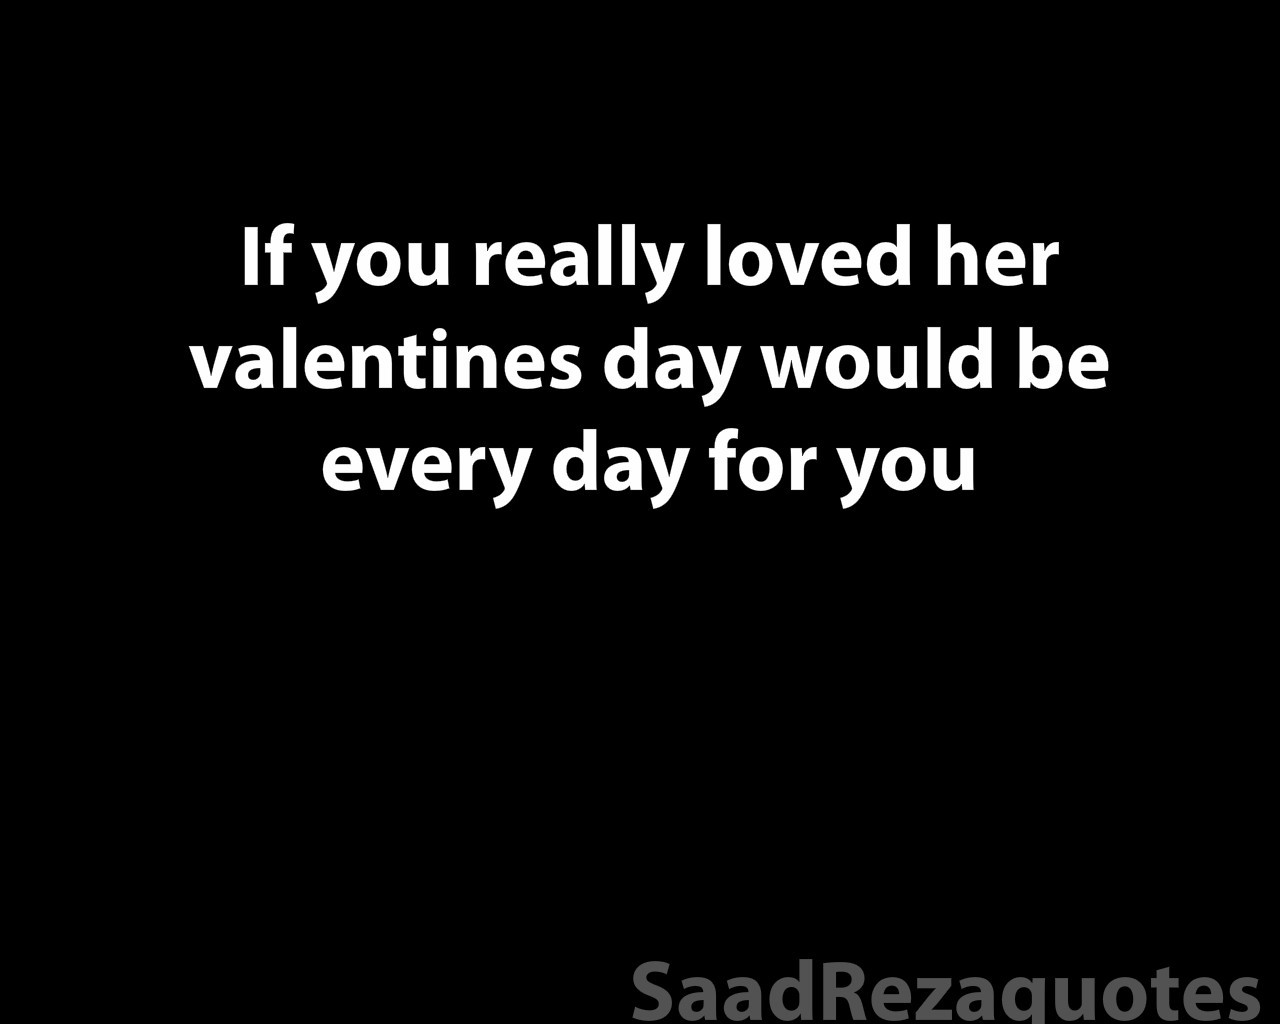 I Hate Valentines Day Quotes
 I Hate Valentines Day Quotes QuotesGram